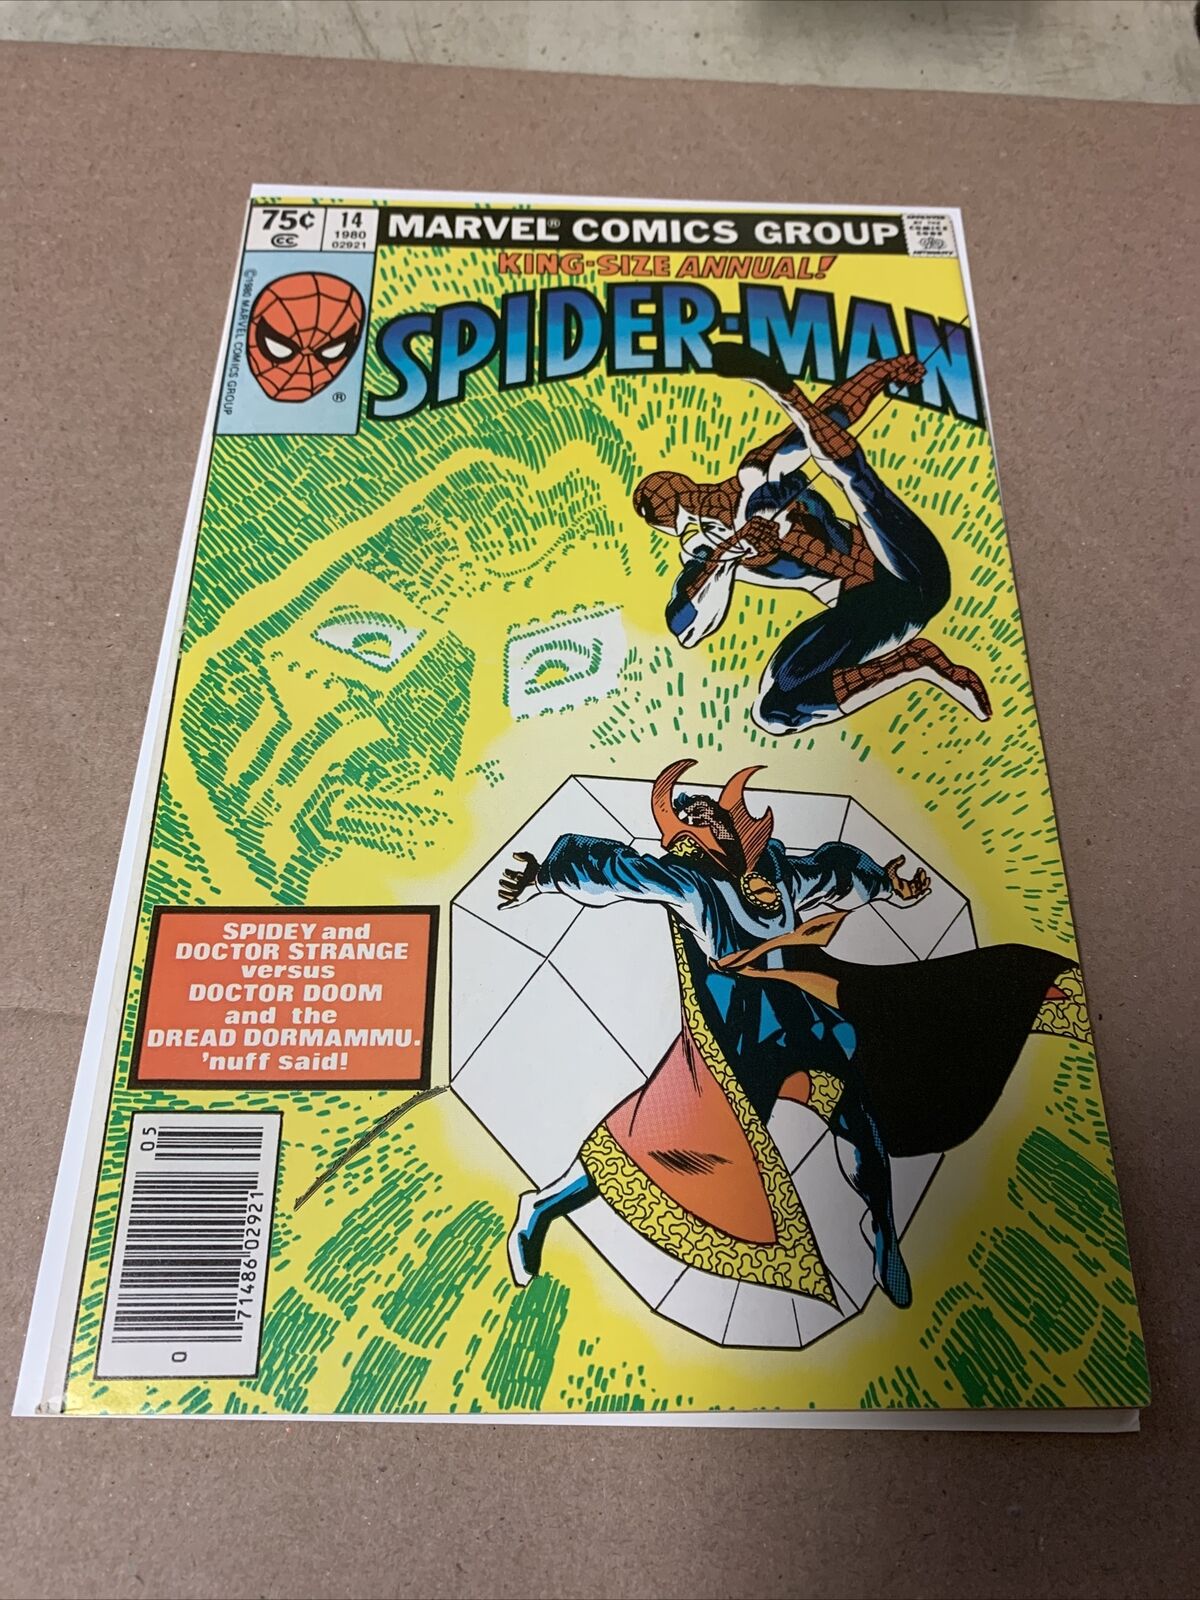 The Amazing Spider-Man King Sized Annual #14, Dr. Stranger 1980,